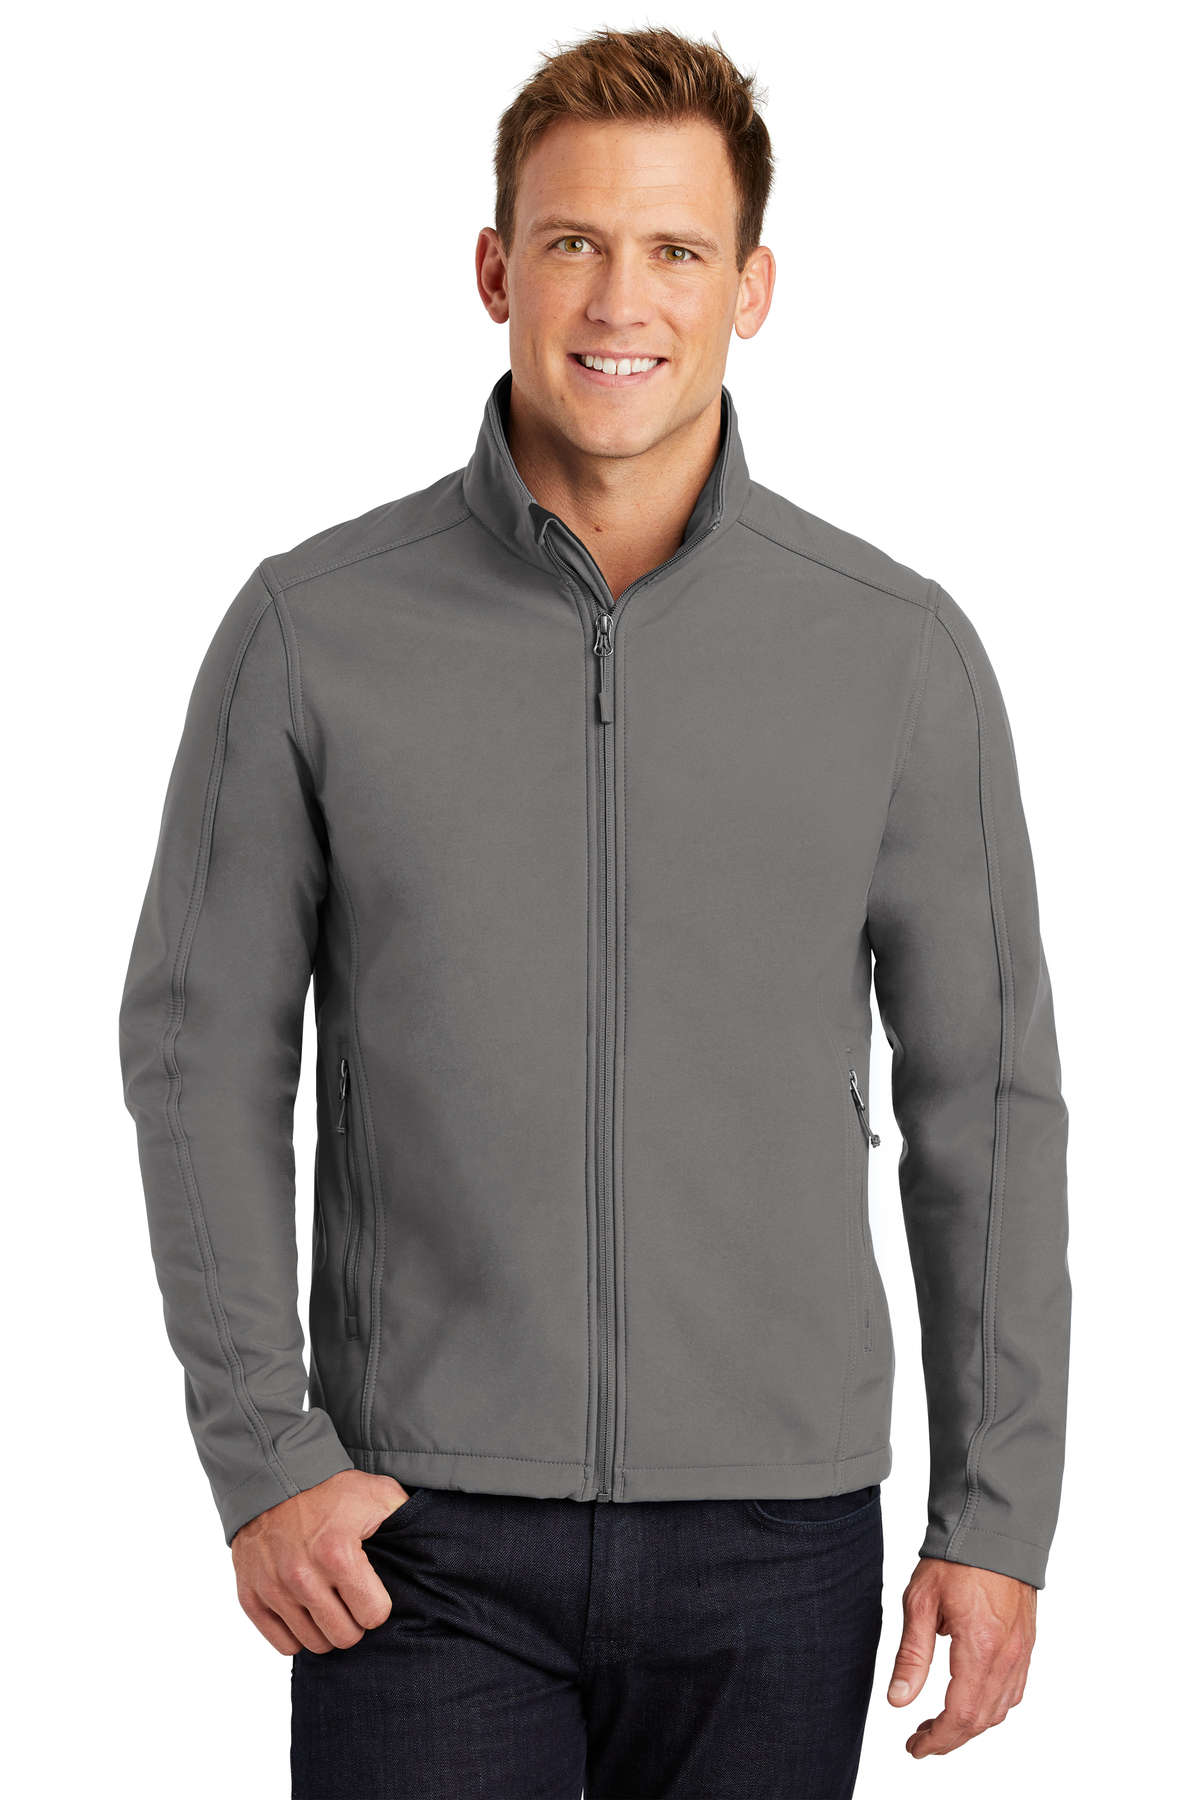 Port Authority Embroidered Men's Core Soft Shell Jacket - Queensboro